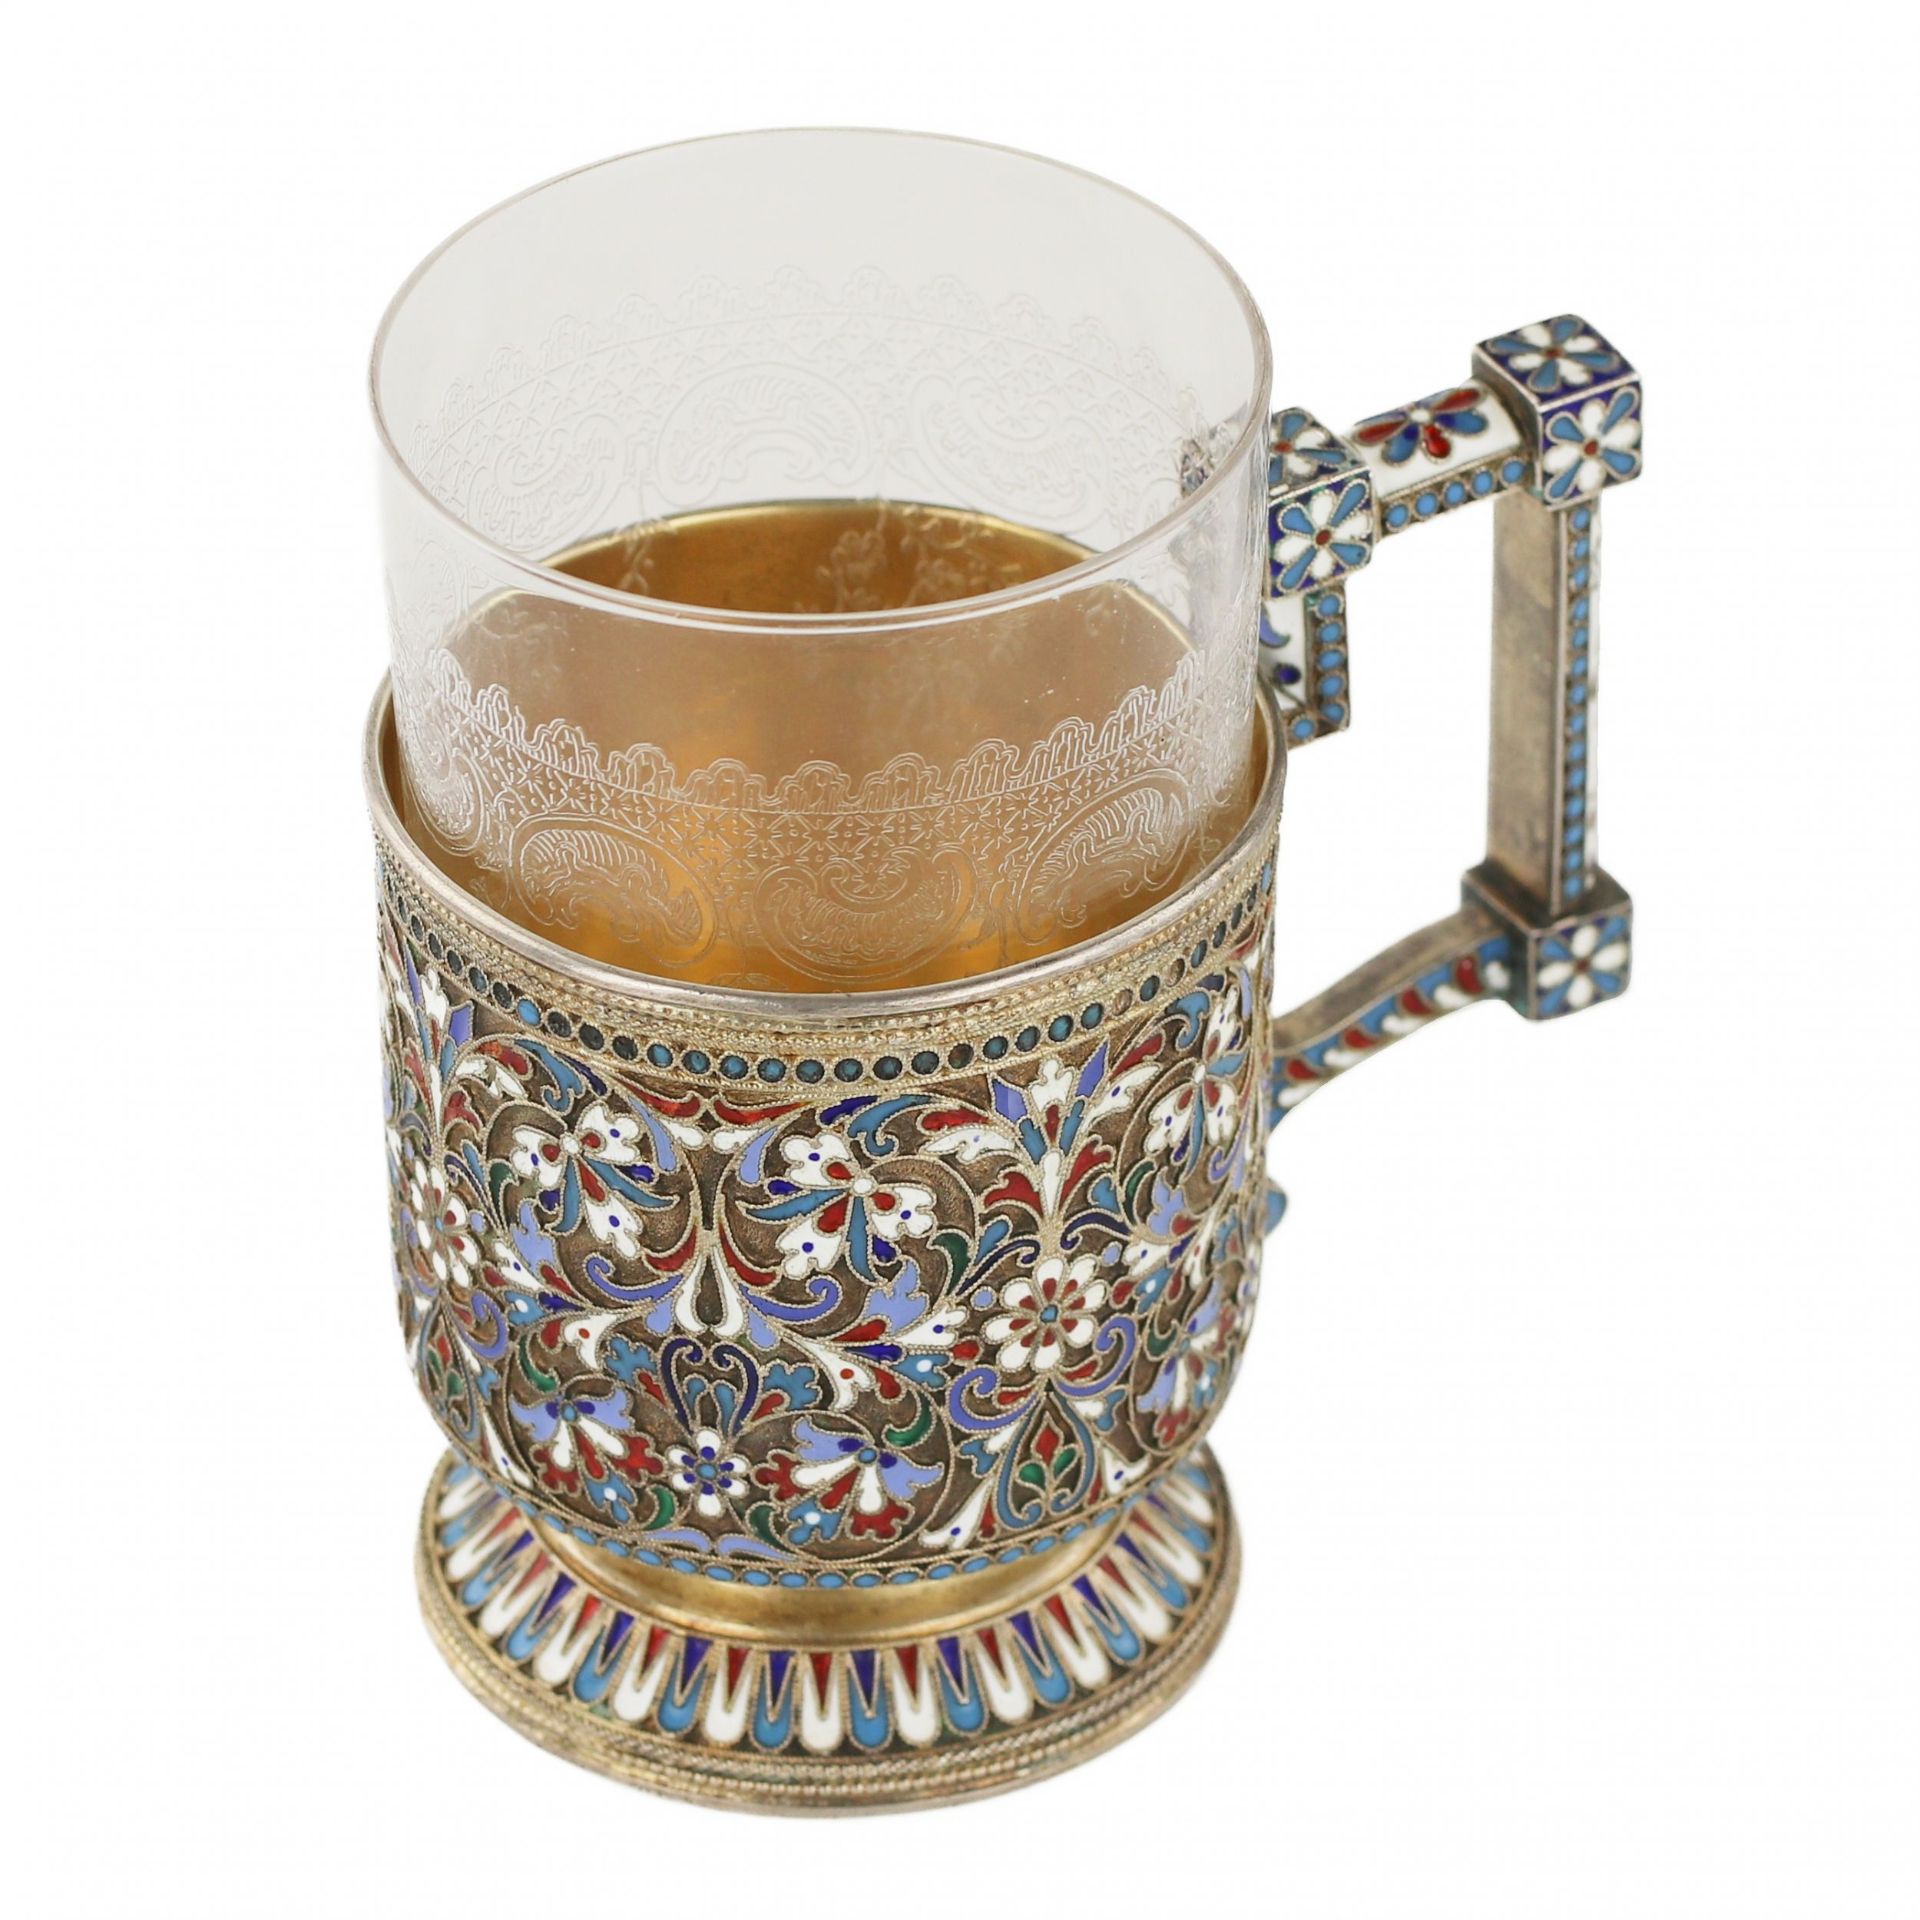 N.V. Alekseev. Silver glass holder in cloisonne enamels. Moscow. The turn of the 19th and 20th cent - Image 5 of 8